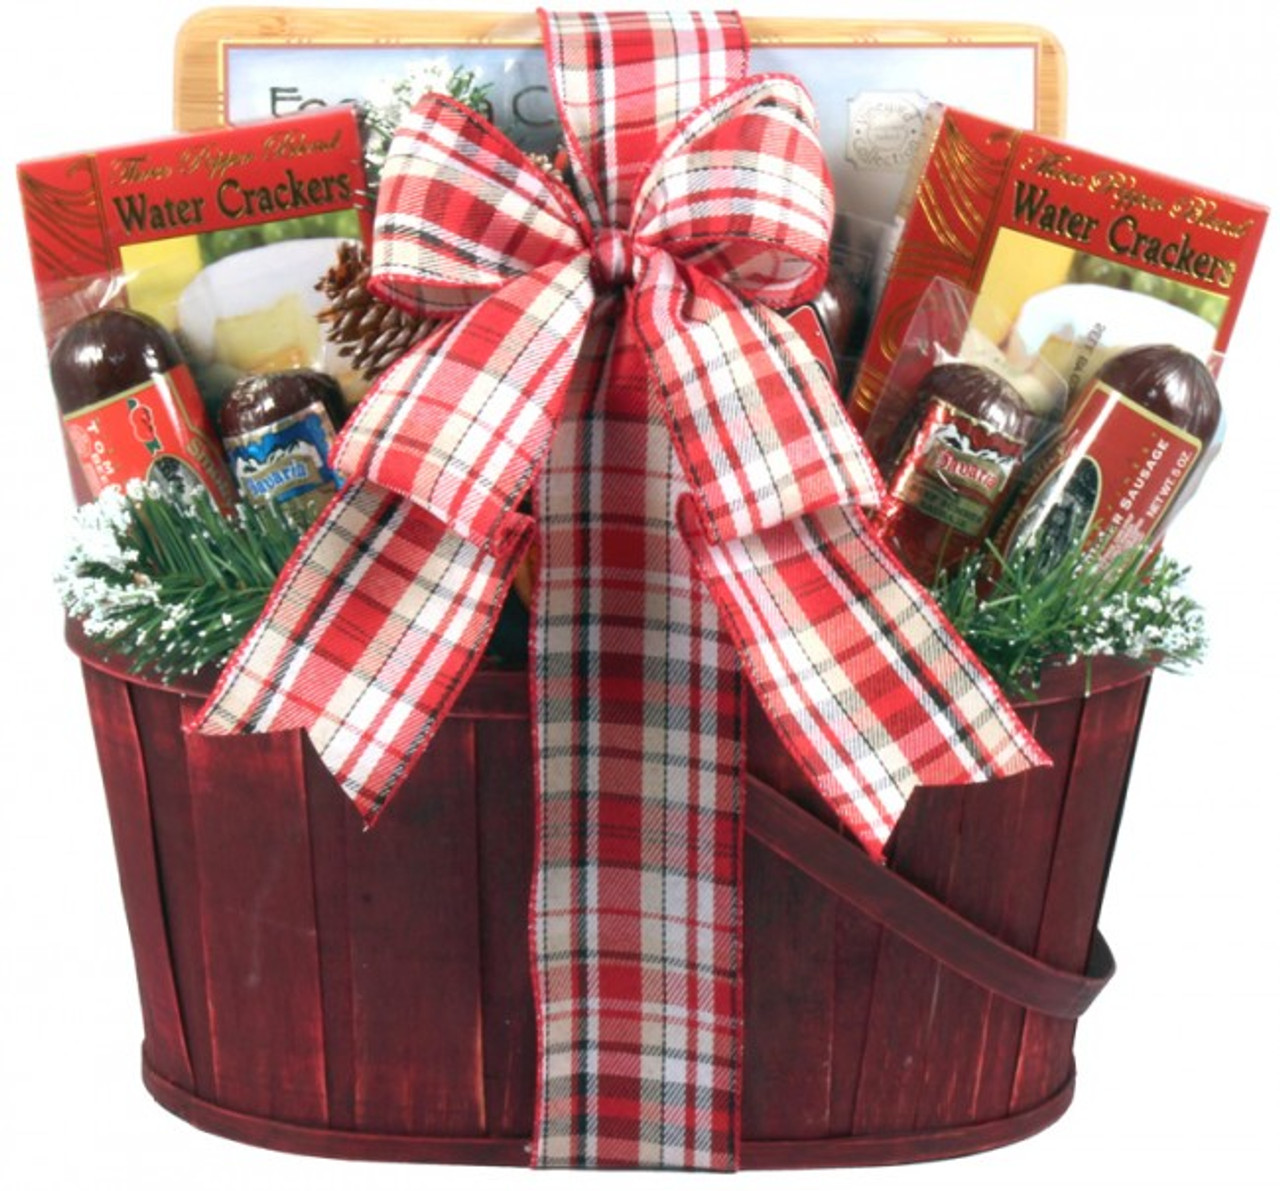 Hearty Meat Lovers Gift Basket